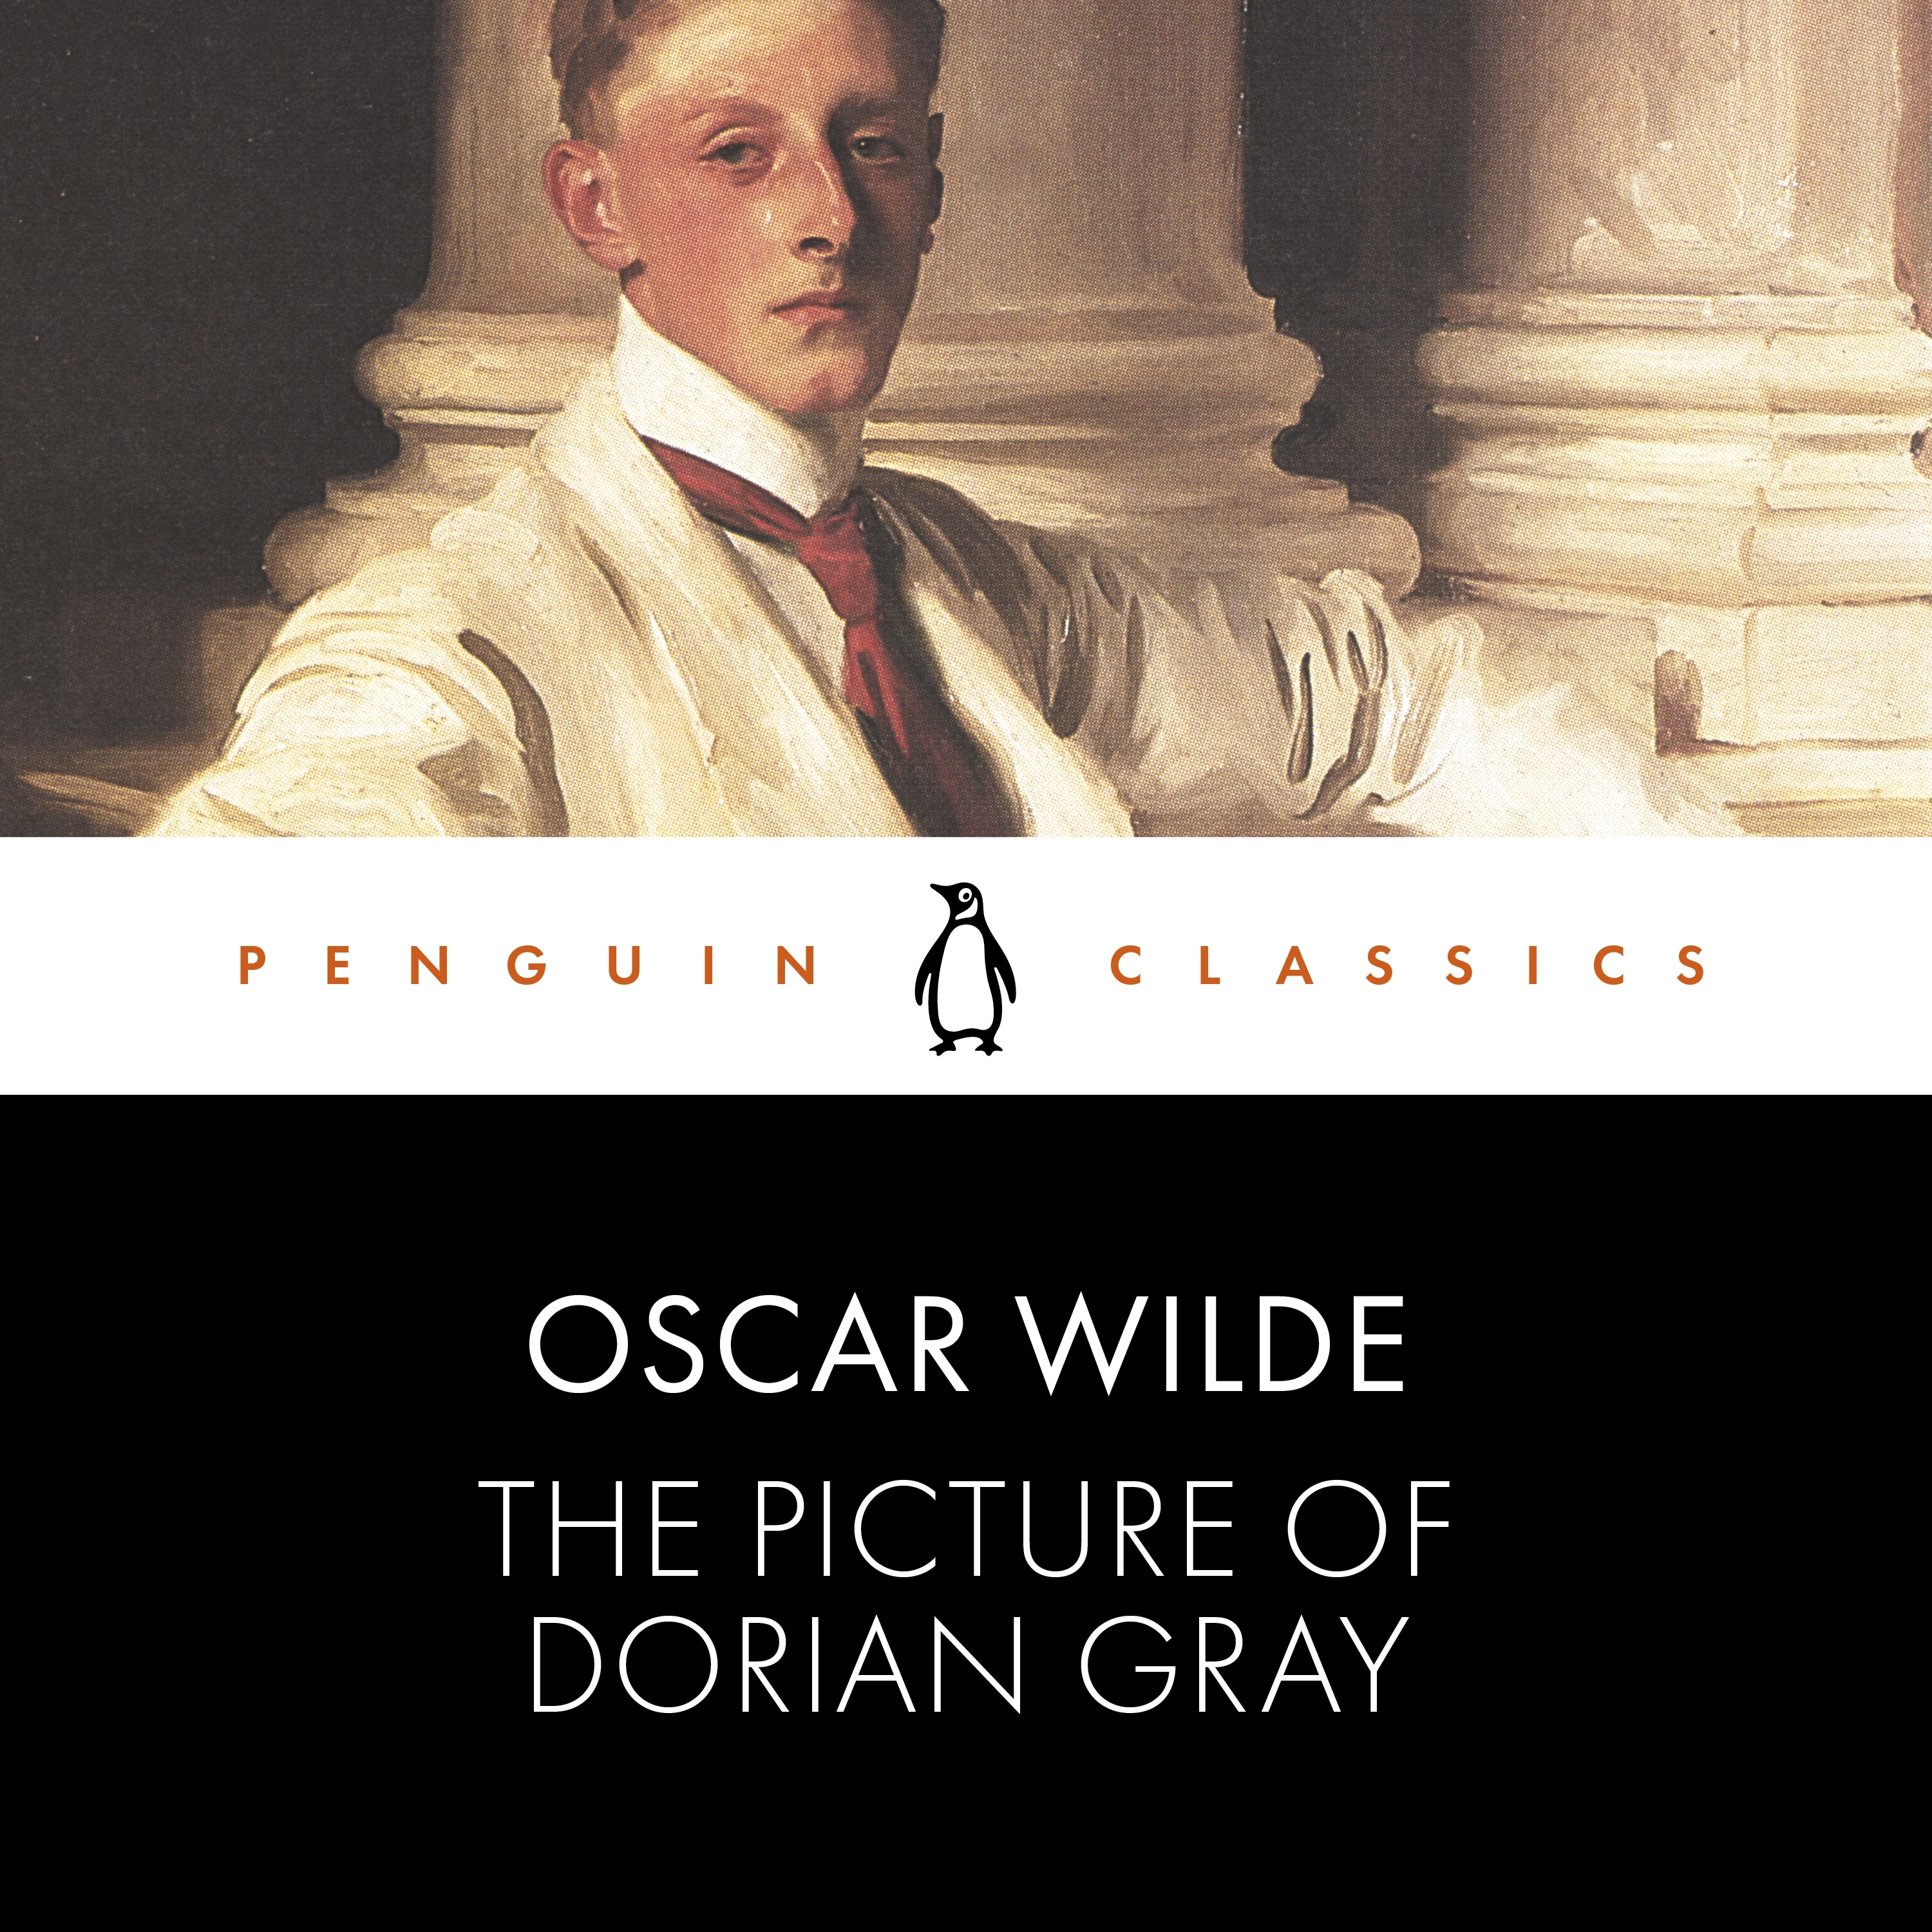 the picture of dorian gray is about dorian gray's loss of innocence essay